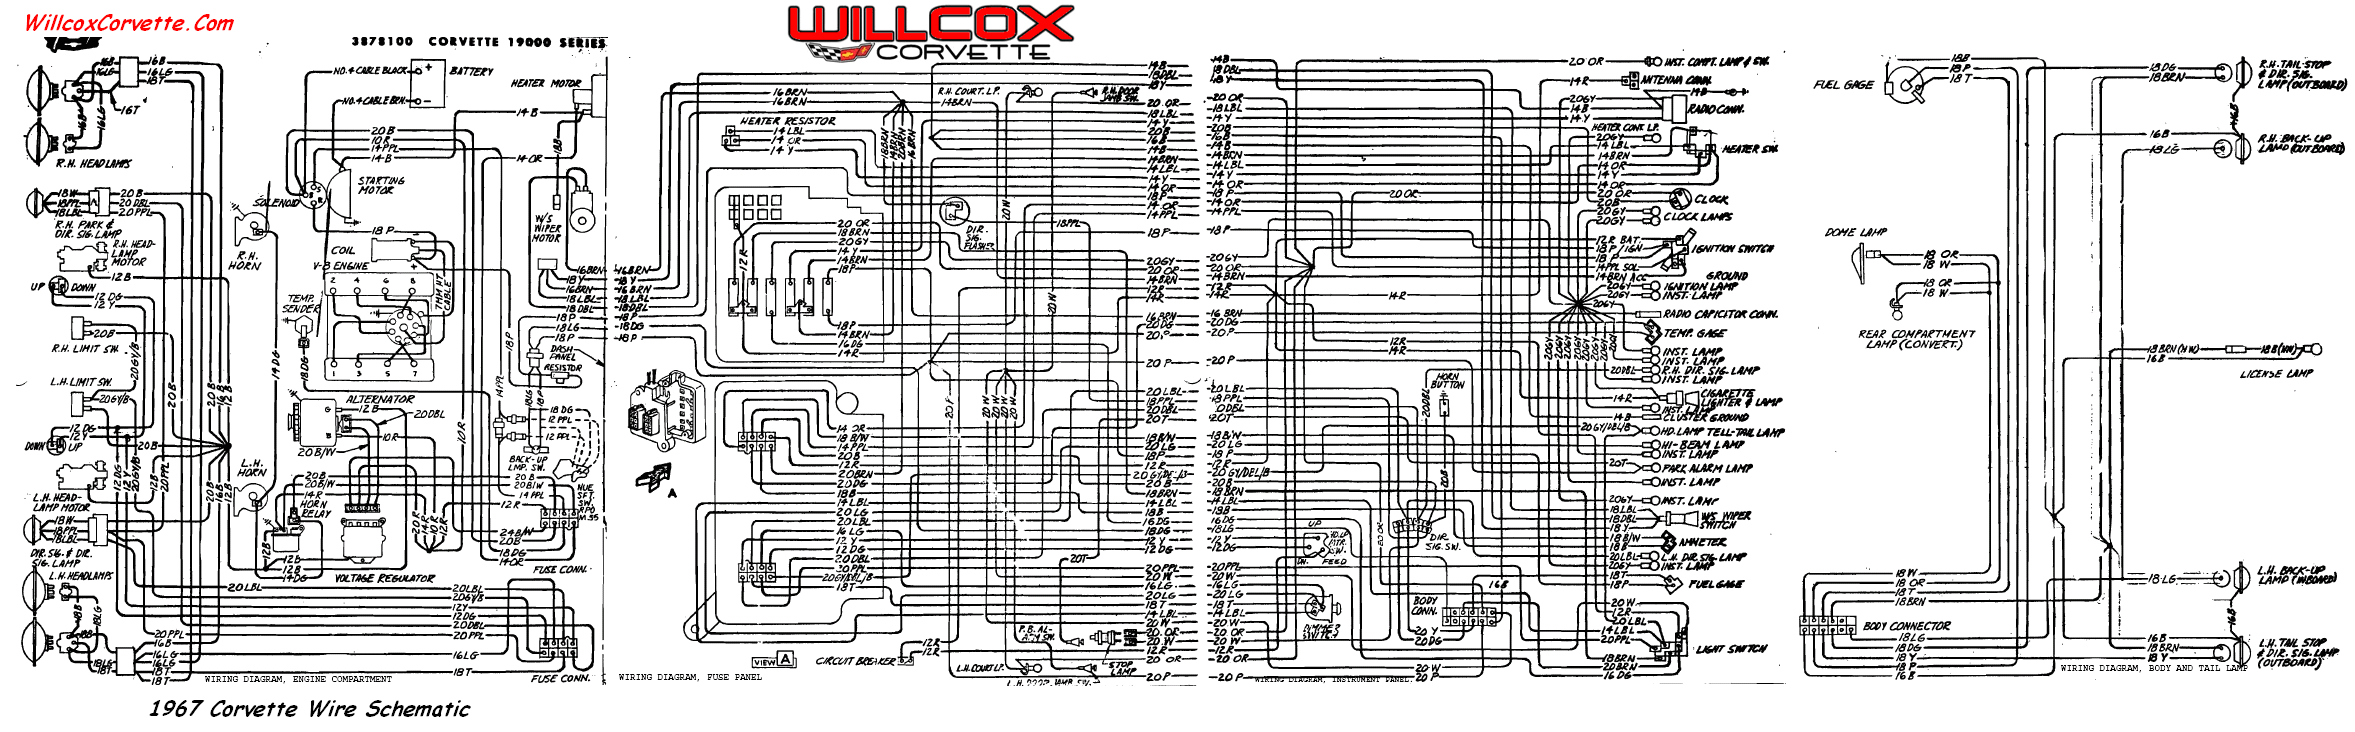 67 wire schematic for tracing wires png